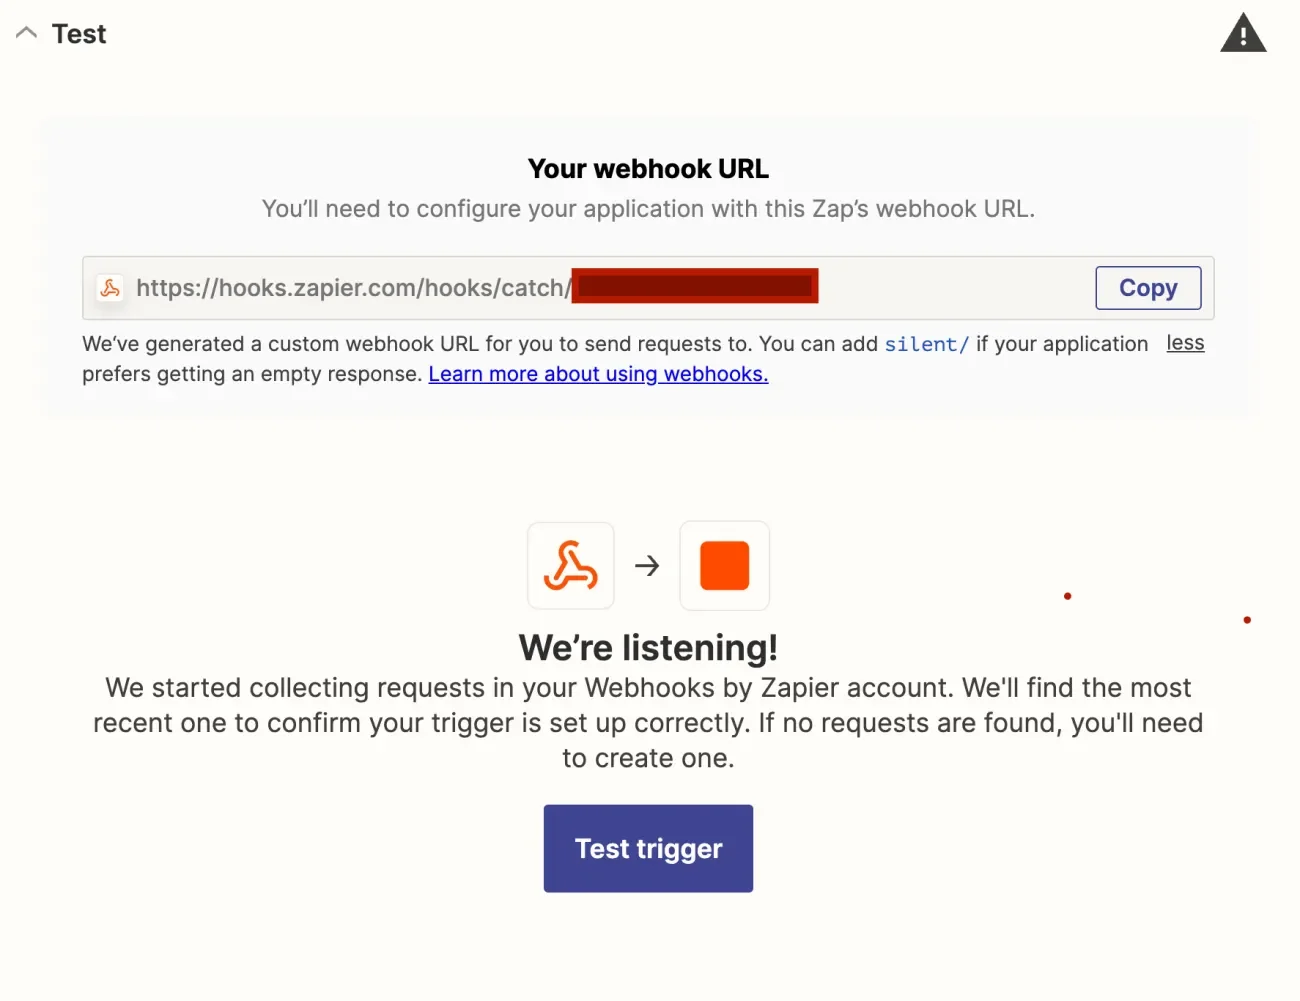 Zapier providing the webhook URL and saying that it is listening and ready